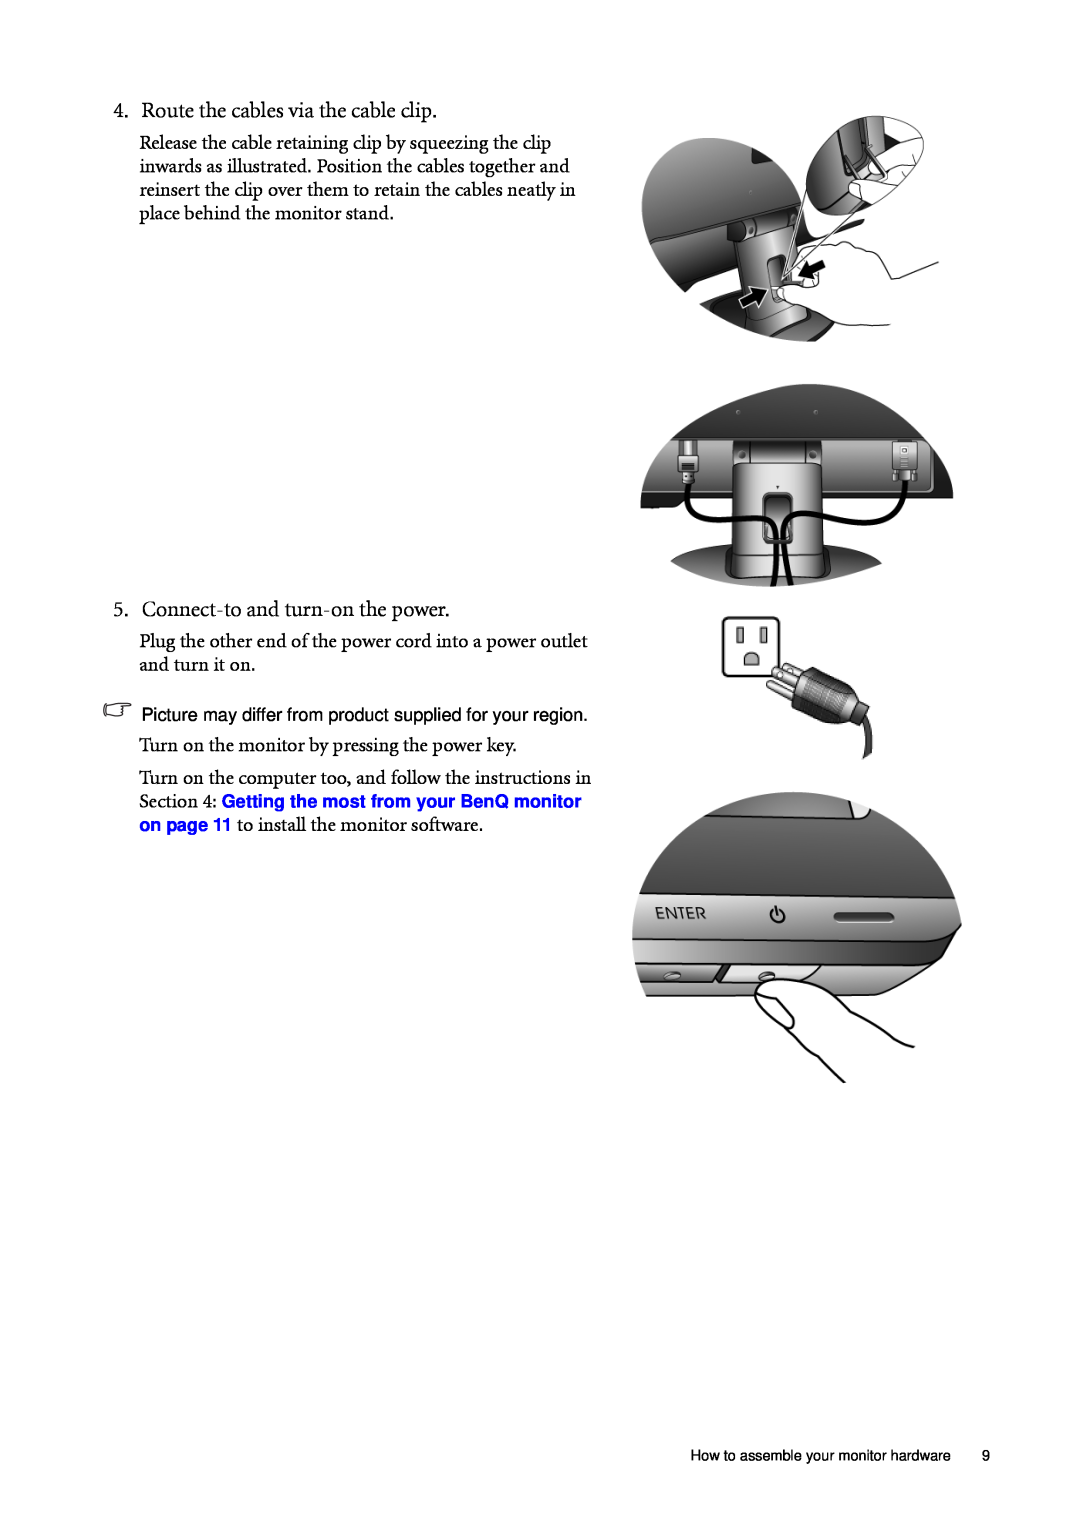 BenQ G2220HDA, G2020HDA user manual Route the cables via the cable clip, Connect-to and turn-on the power 